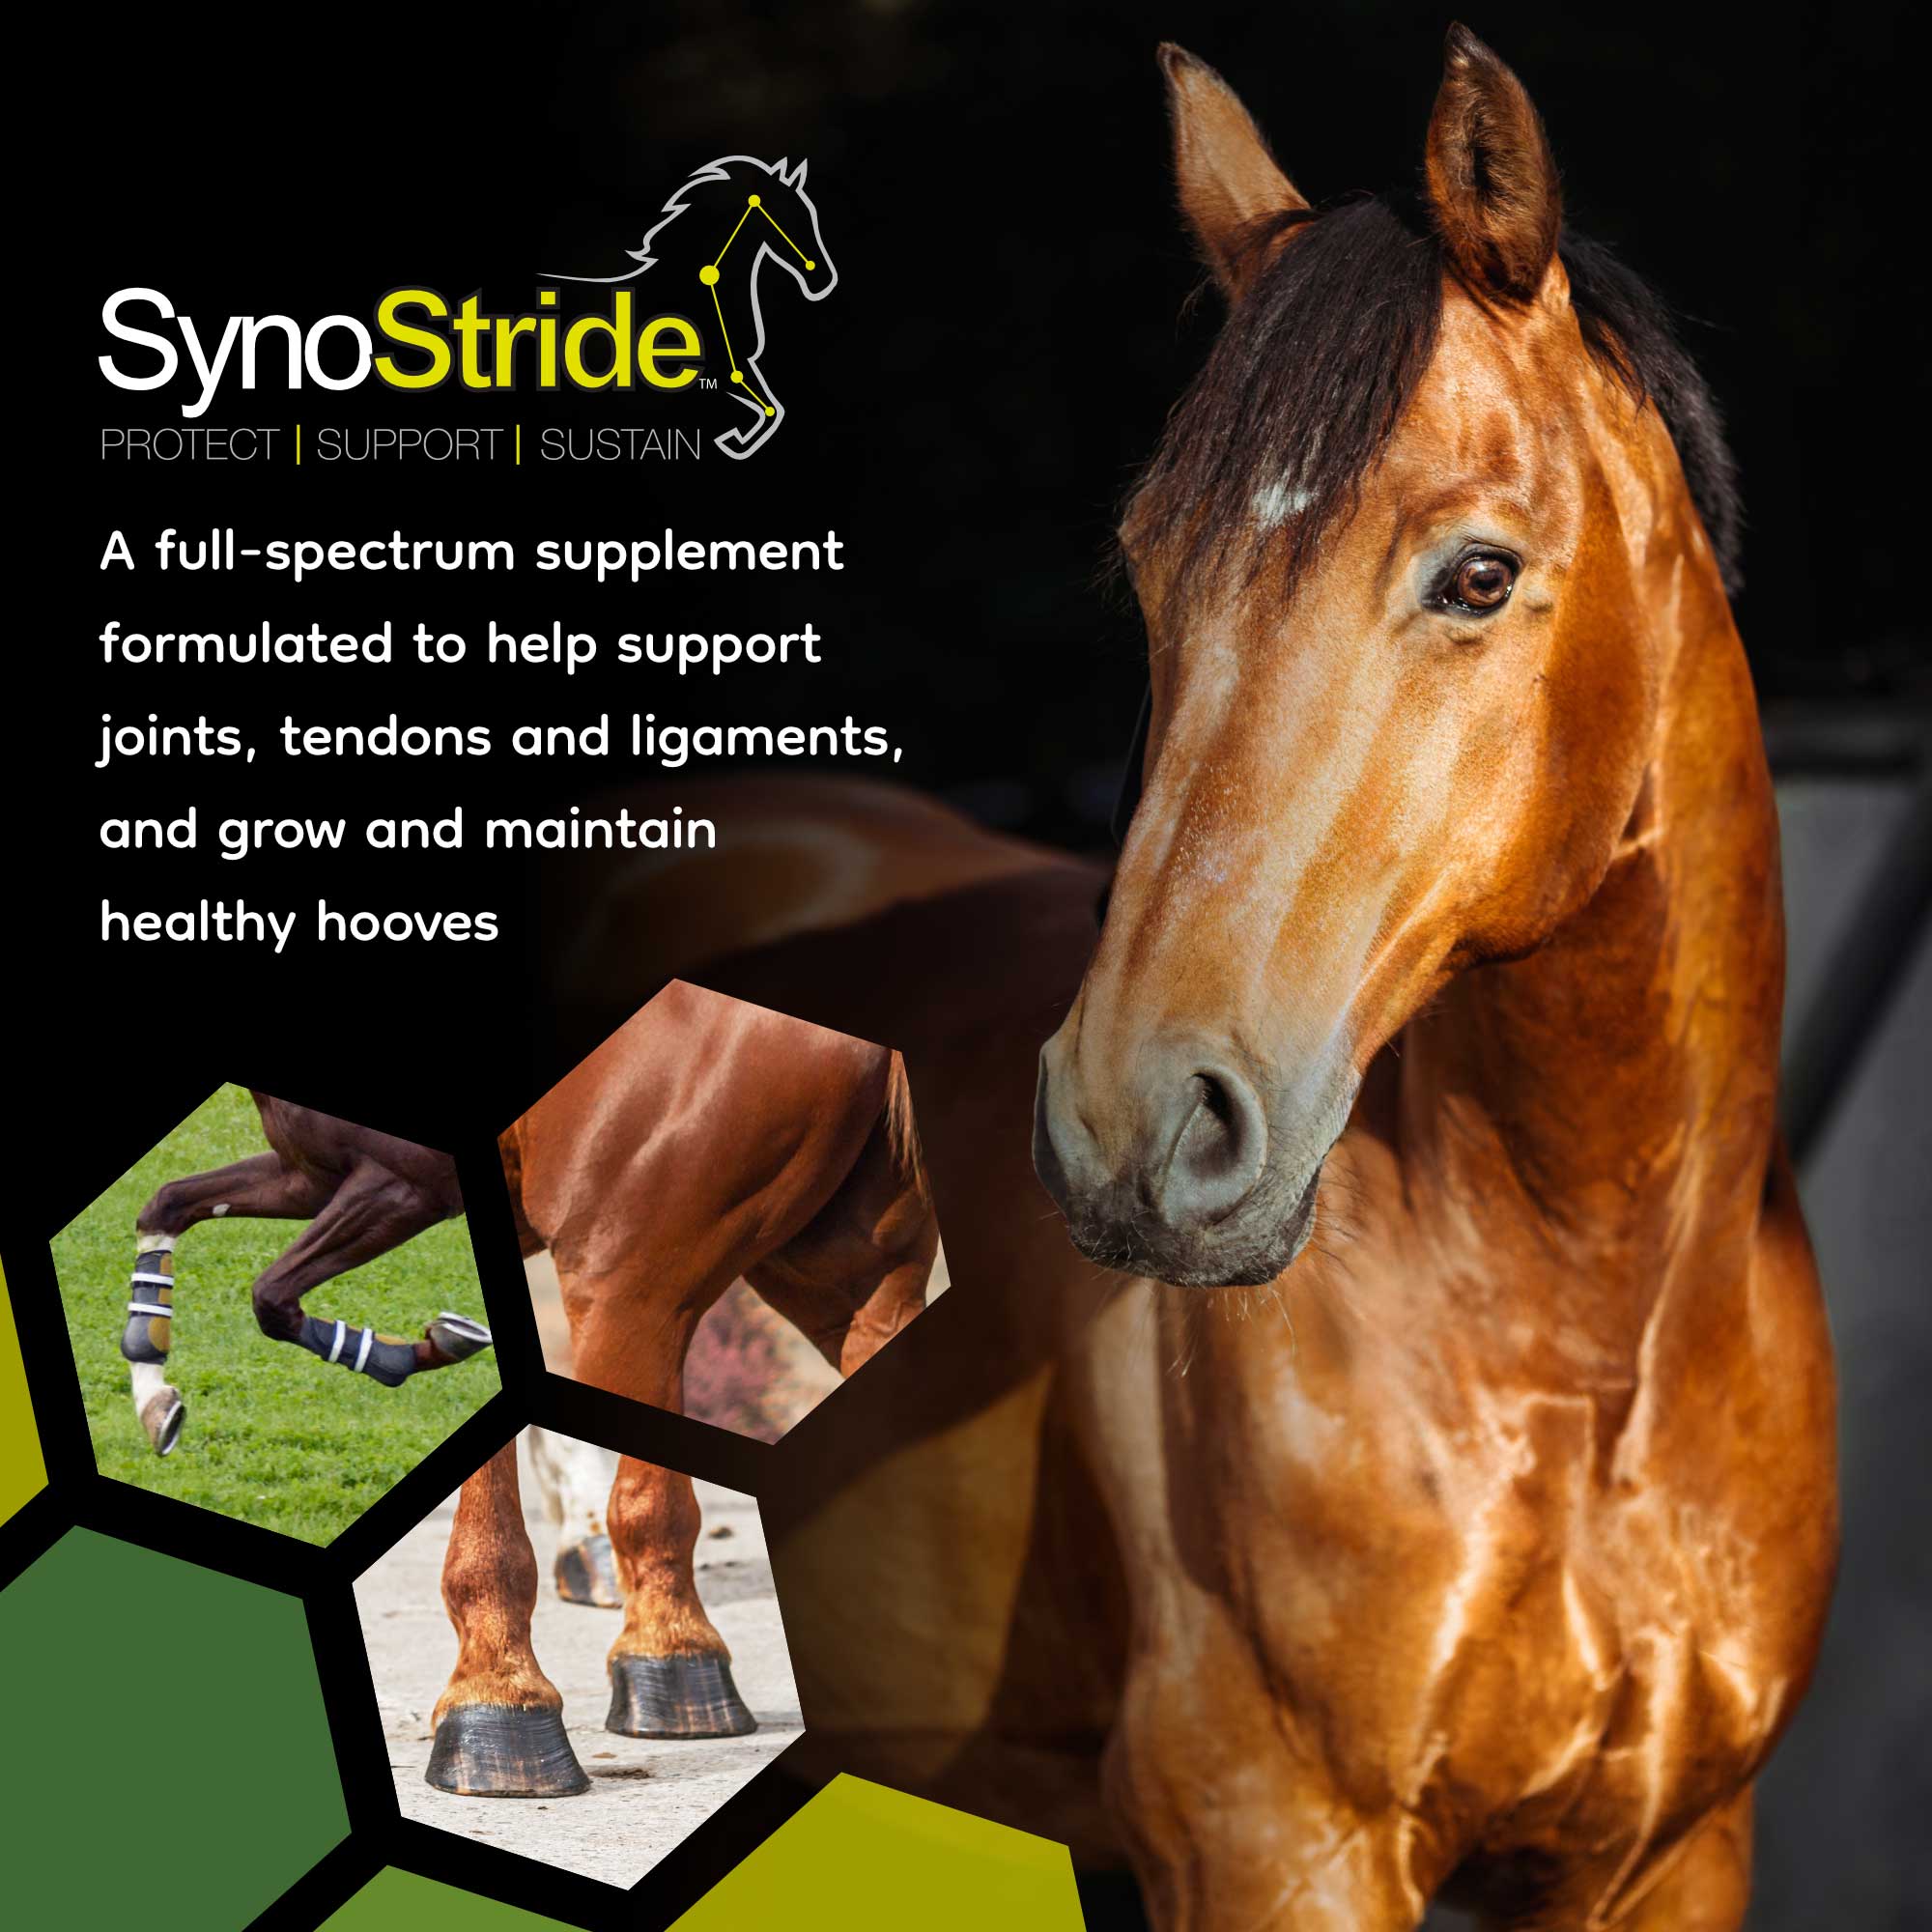 All natural equine supplements